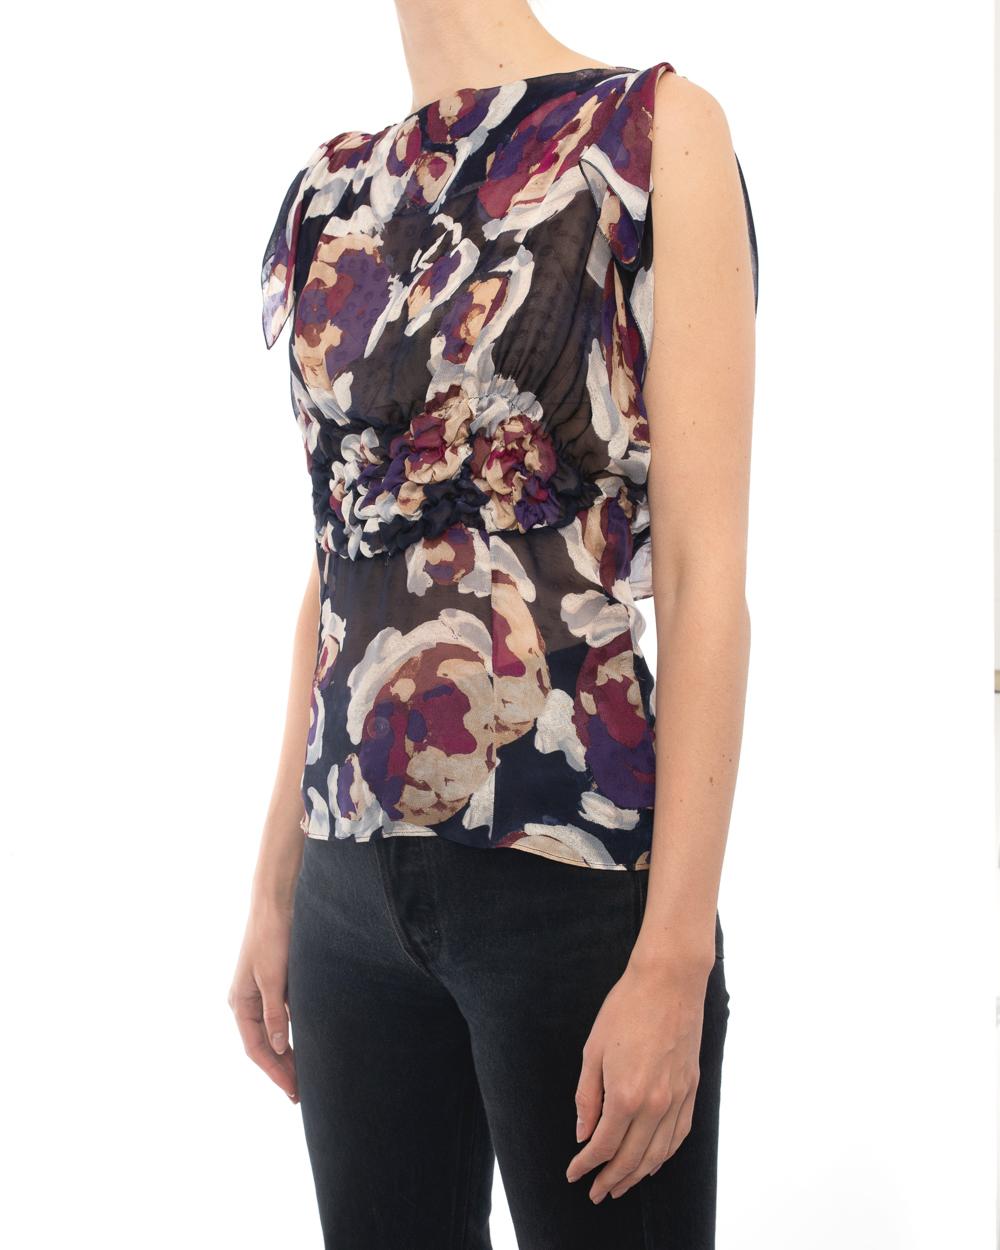 Chanel 2010 Resort Runway Sheer Purple Silk Floral CC Top - S In Excellent Condition For Sale In Toronto, ON